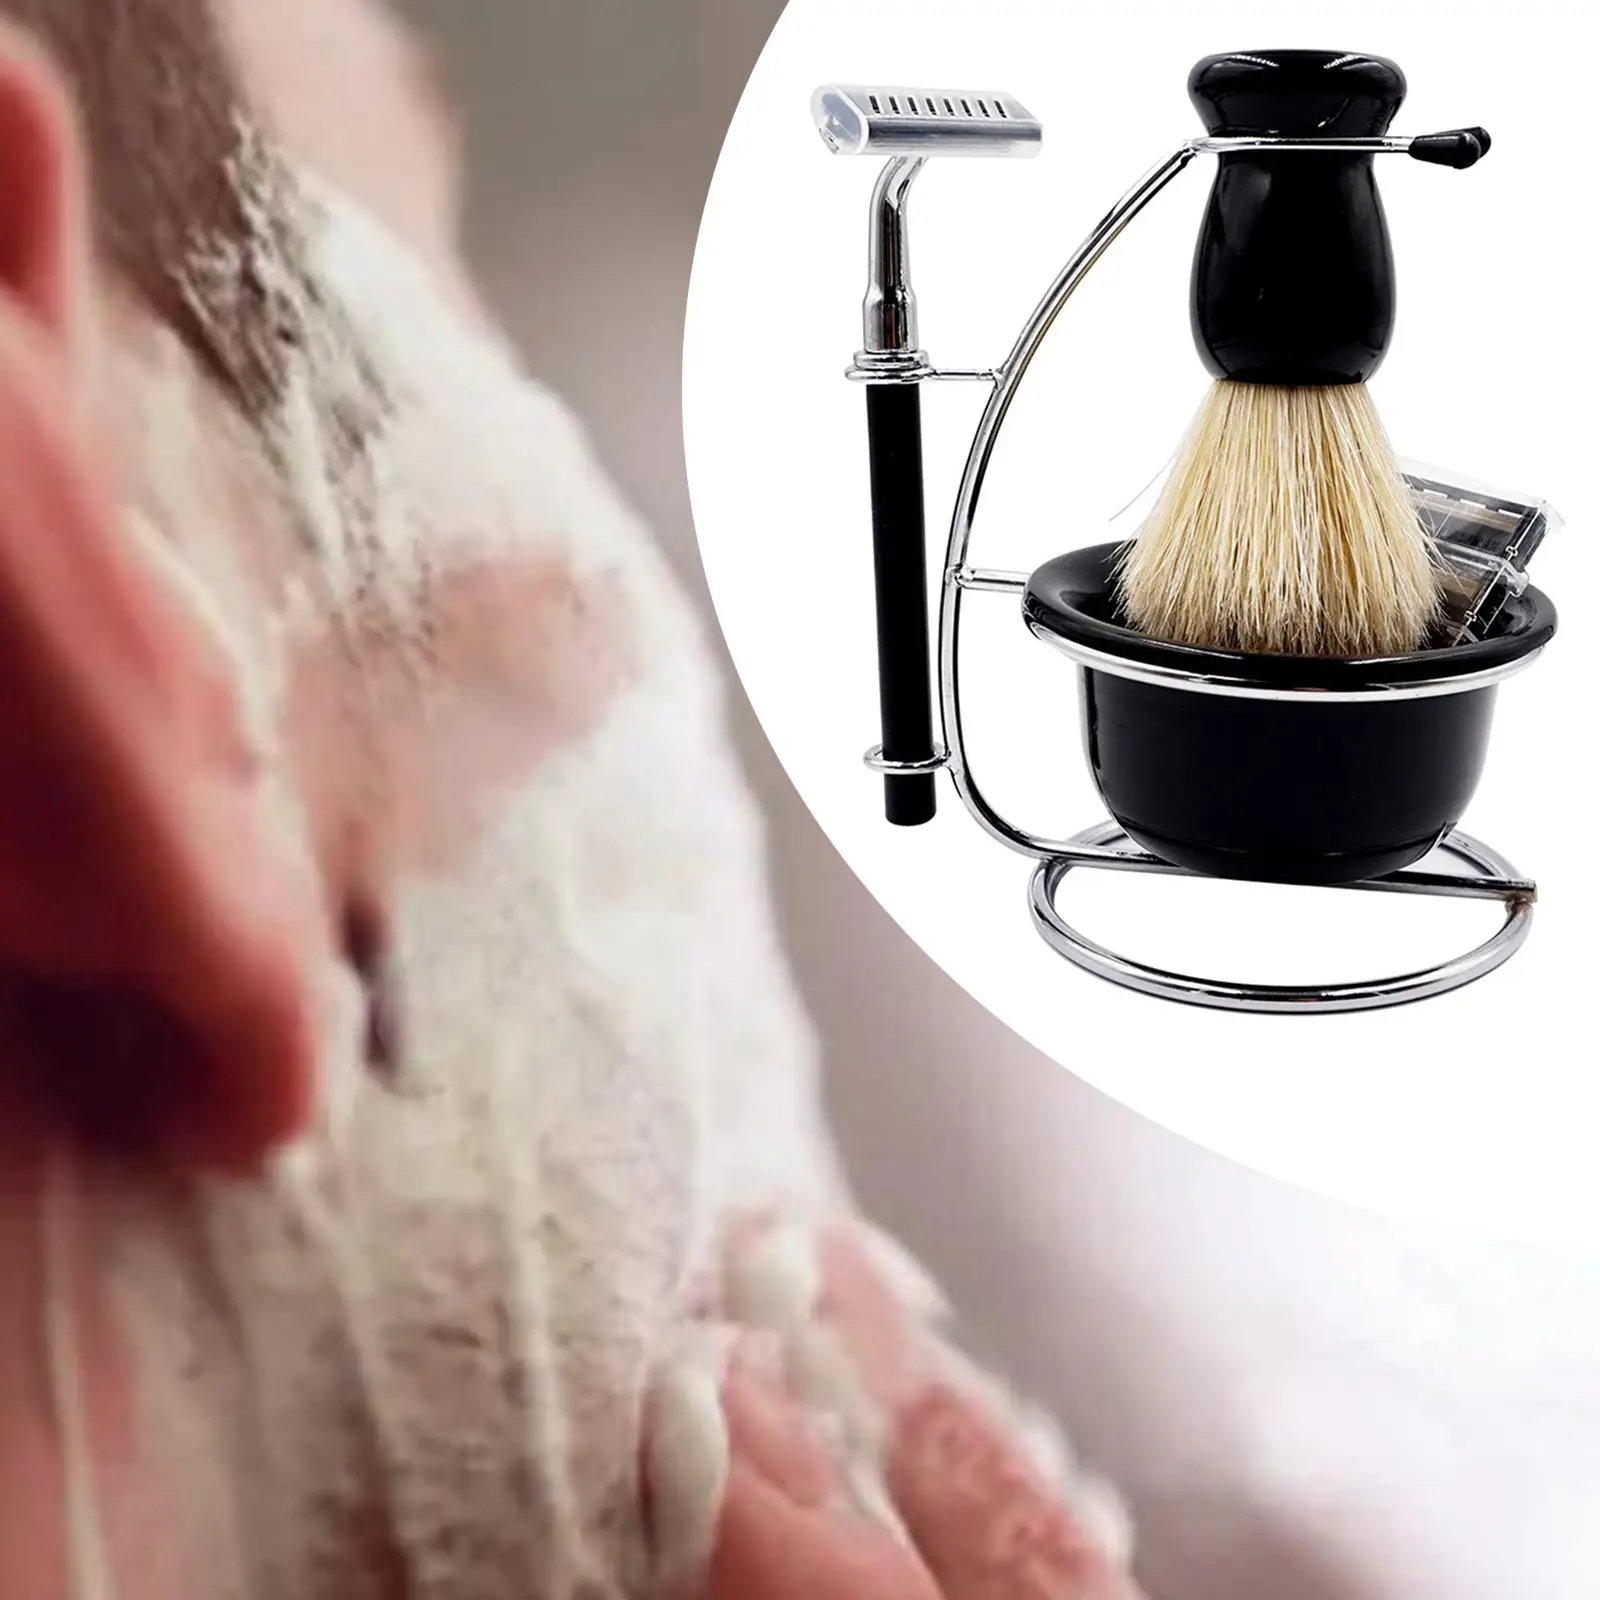 Men Shaving Set Manual Stand Brush Bowl Set Sturdy Solid Durable Accessories Stainess Steel Holder Professional Elegant